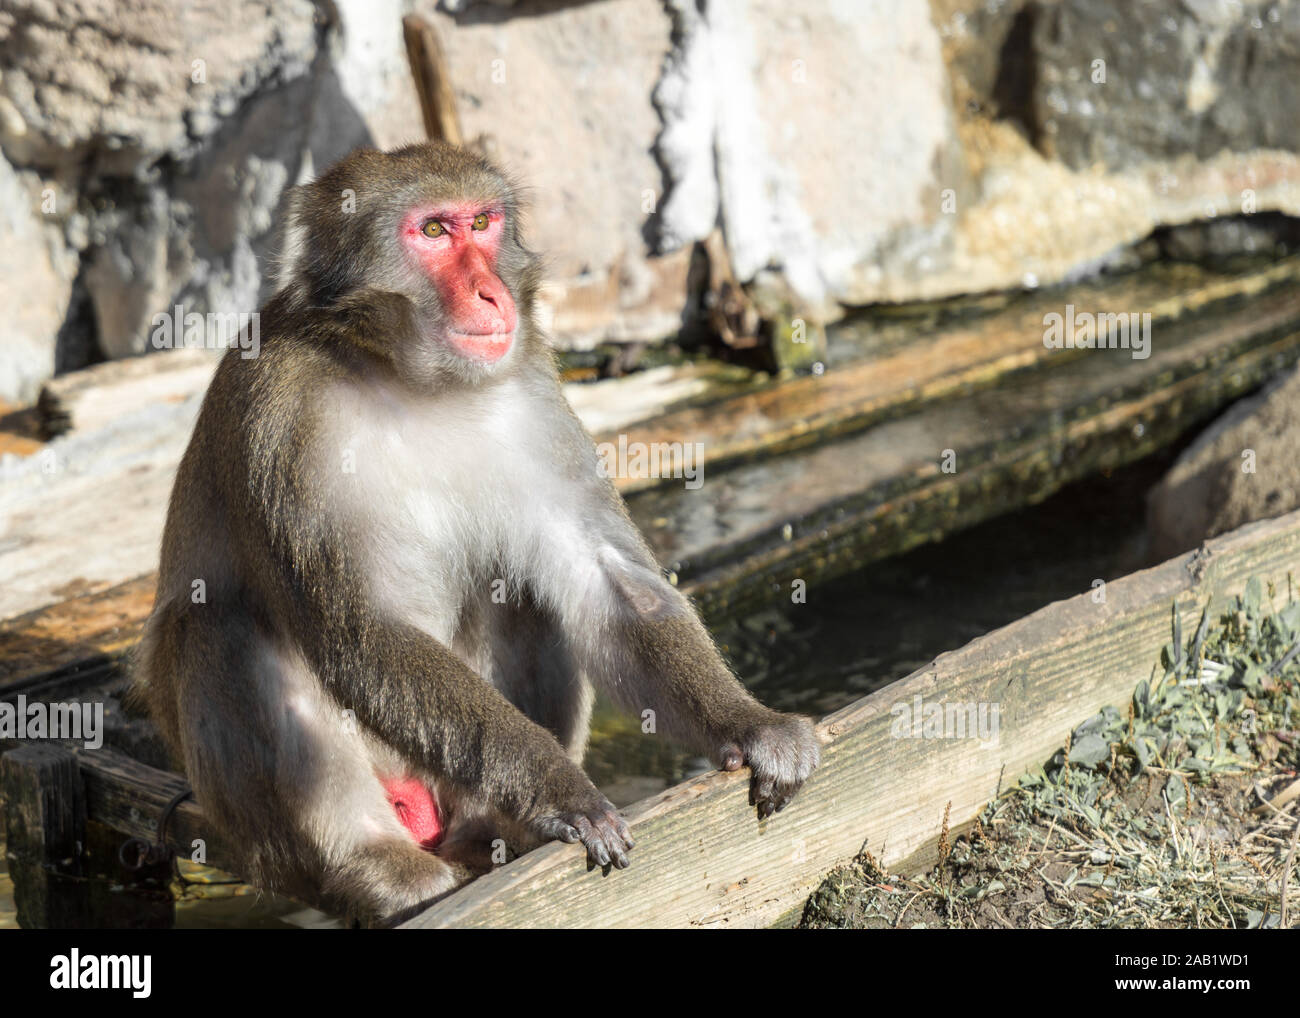 Sitting Japanese macaque monkey with red face Stock Photo